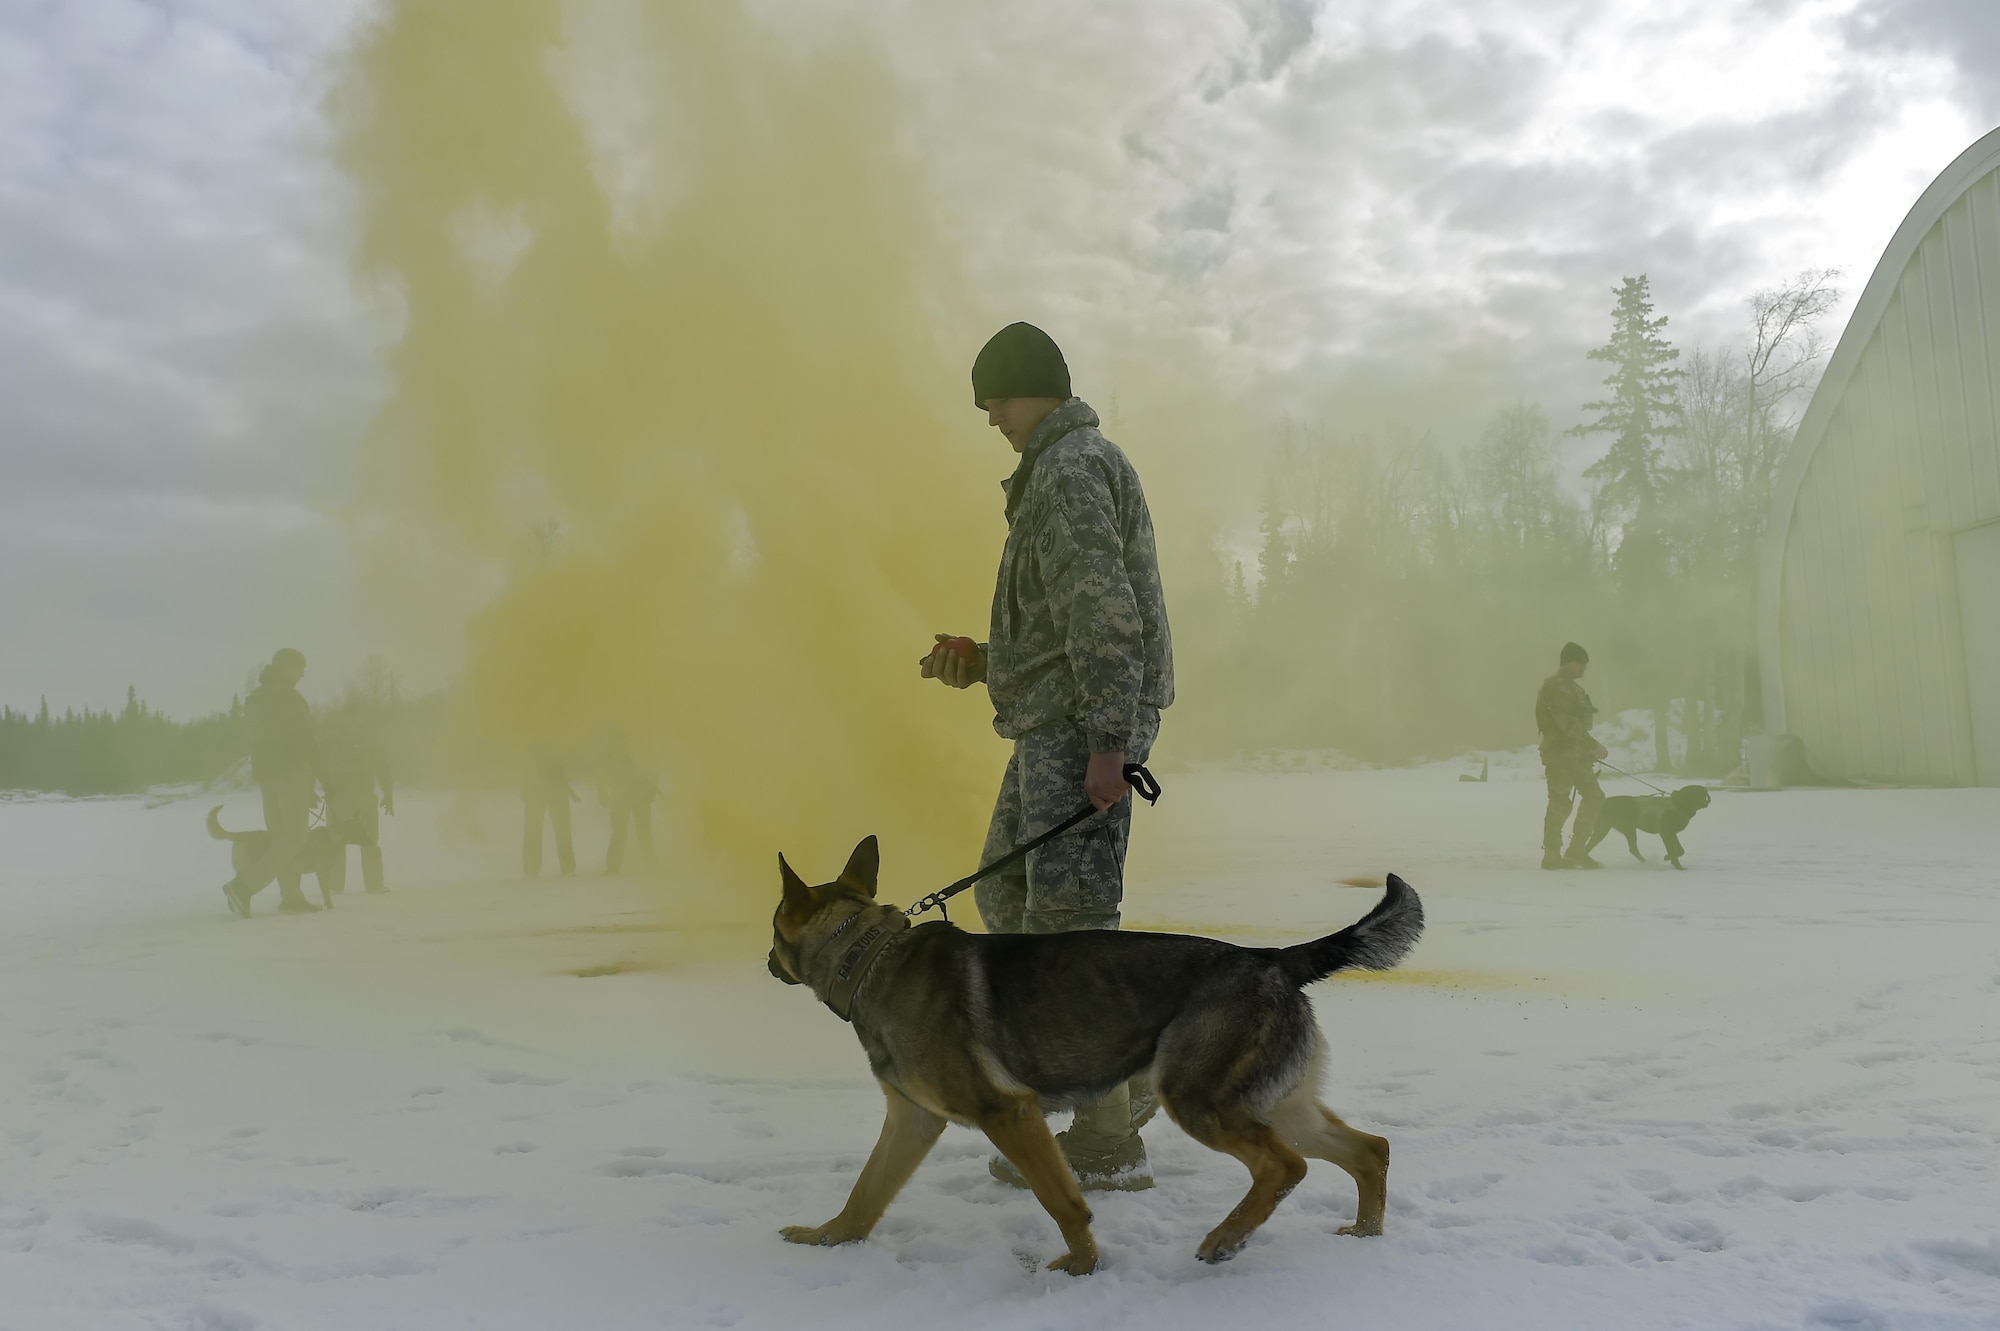 U.S. Army and Air Force military working dog teams assigned to the 549th Military Working Dog Detachment and the 673rd Security Forces Squadron, respectively, conduct K-9 training at Joint Base Elmendorf-Richardson, Alaska, March 17, 2016. The purpose of the K-9 training was to adapt the dogs to possible real-world conditions they might encounter as well as practice detecting possible hidden explosives. (U.S. Air Force photo/Alejandro Pena)